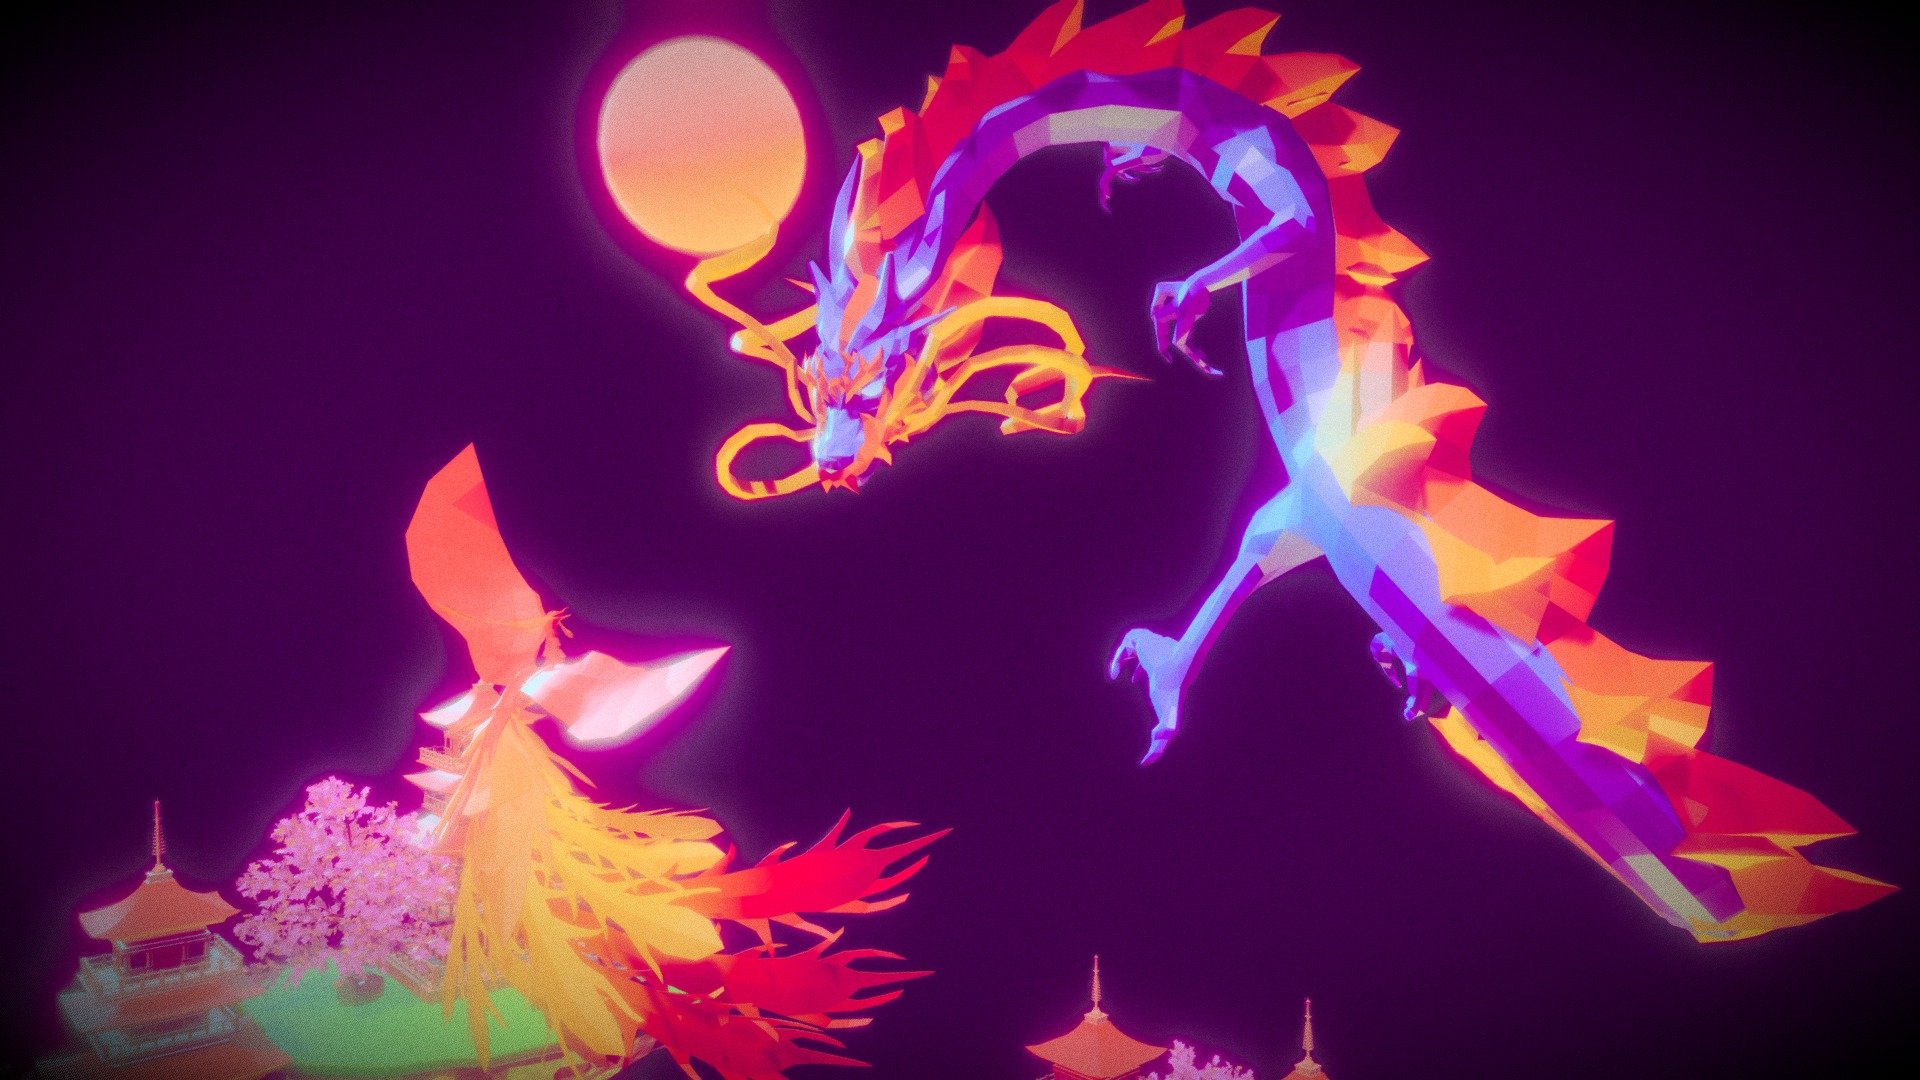 Low Poly art Phoenix and Dragon - Phoenix and dragon - 3D model by Animabyfad 3d model